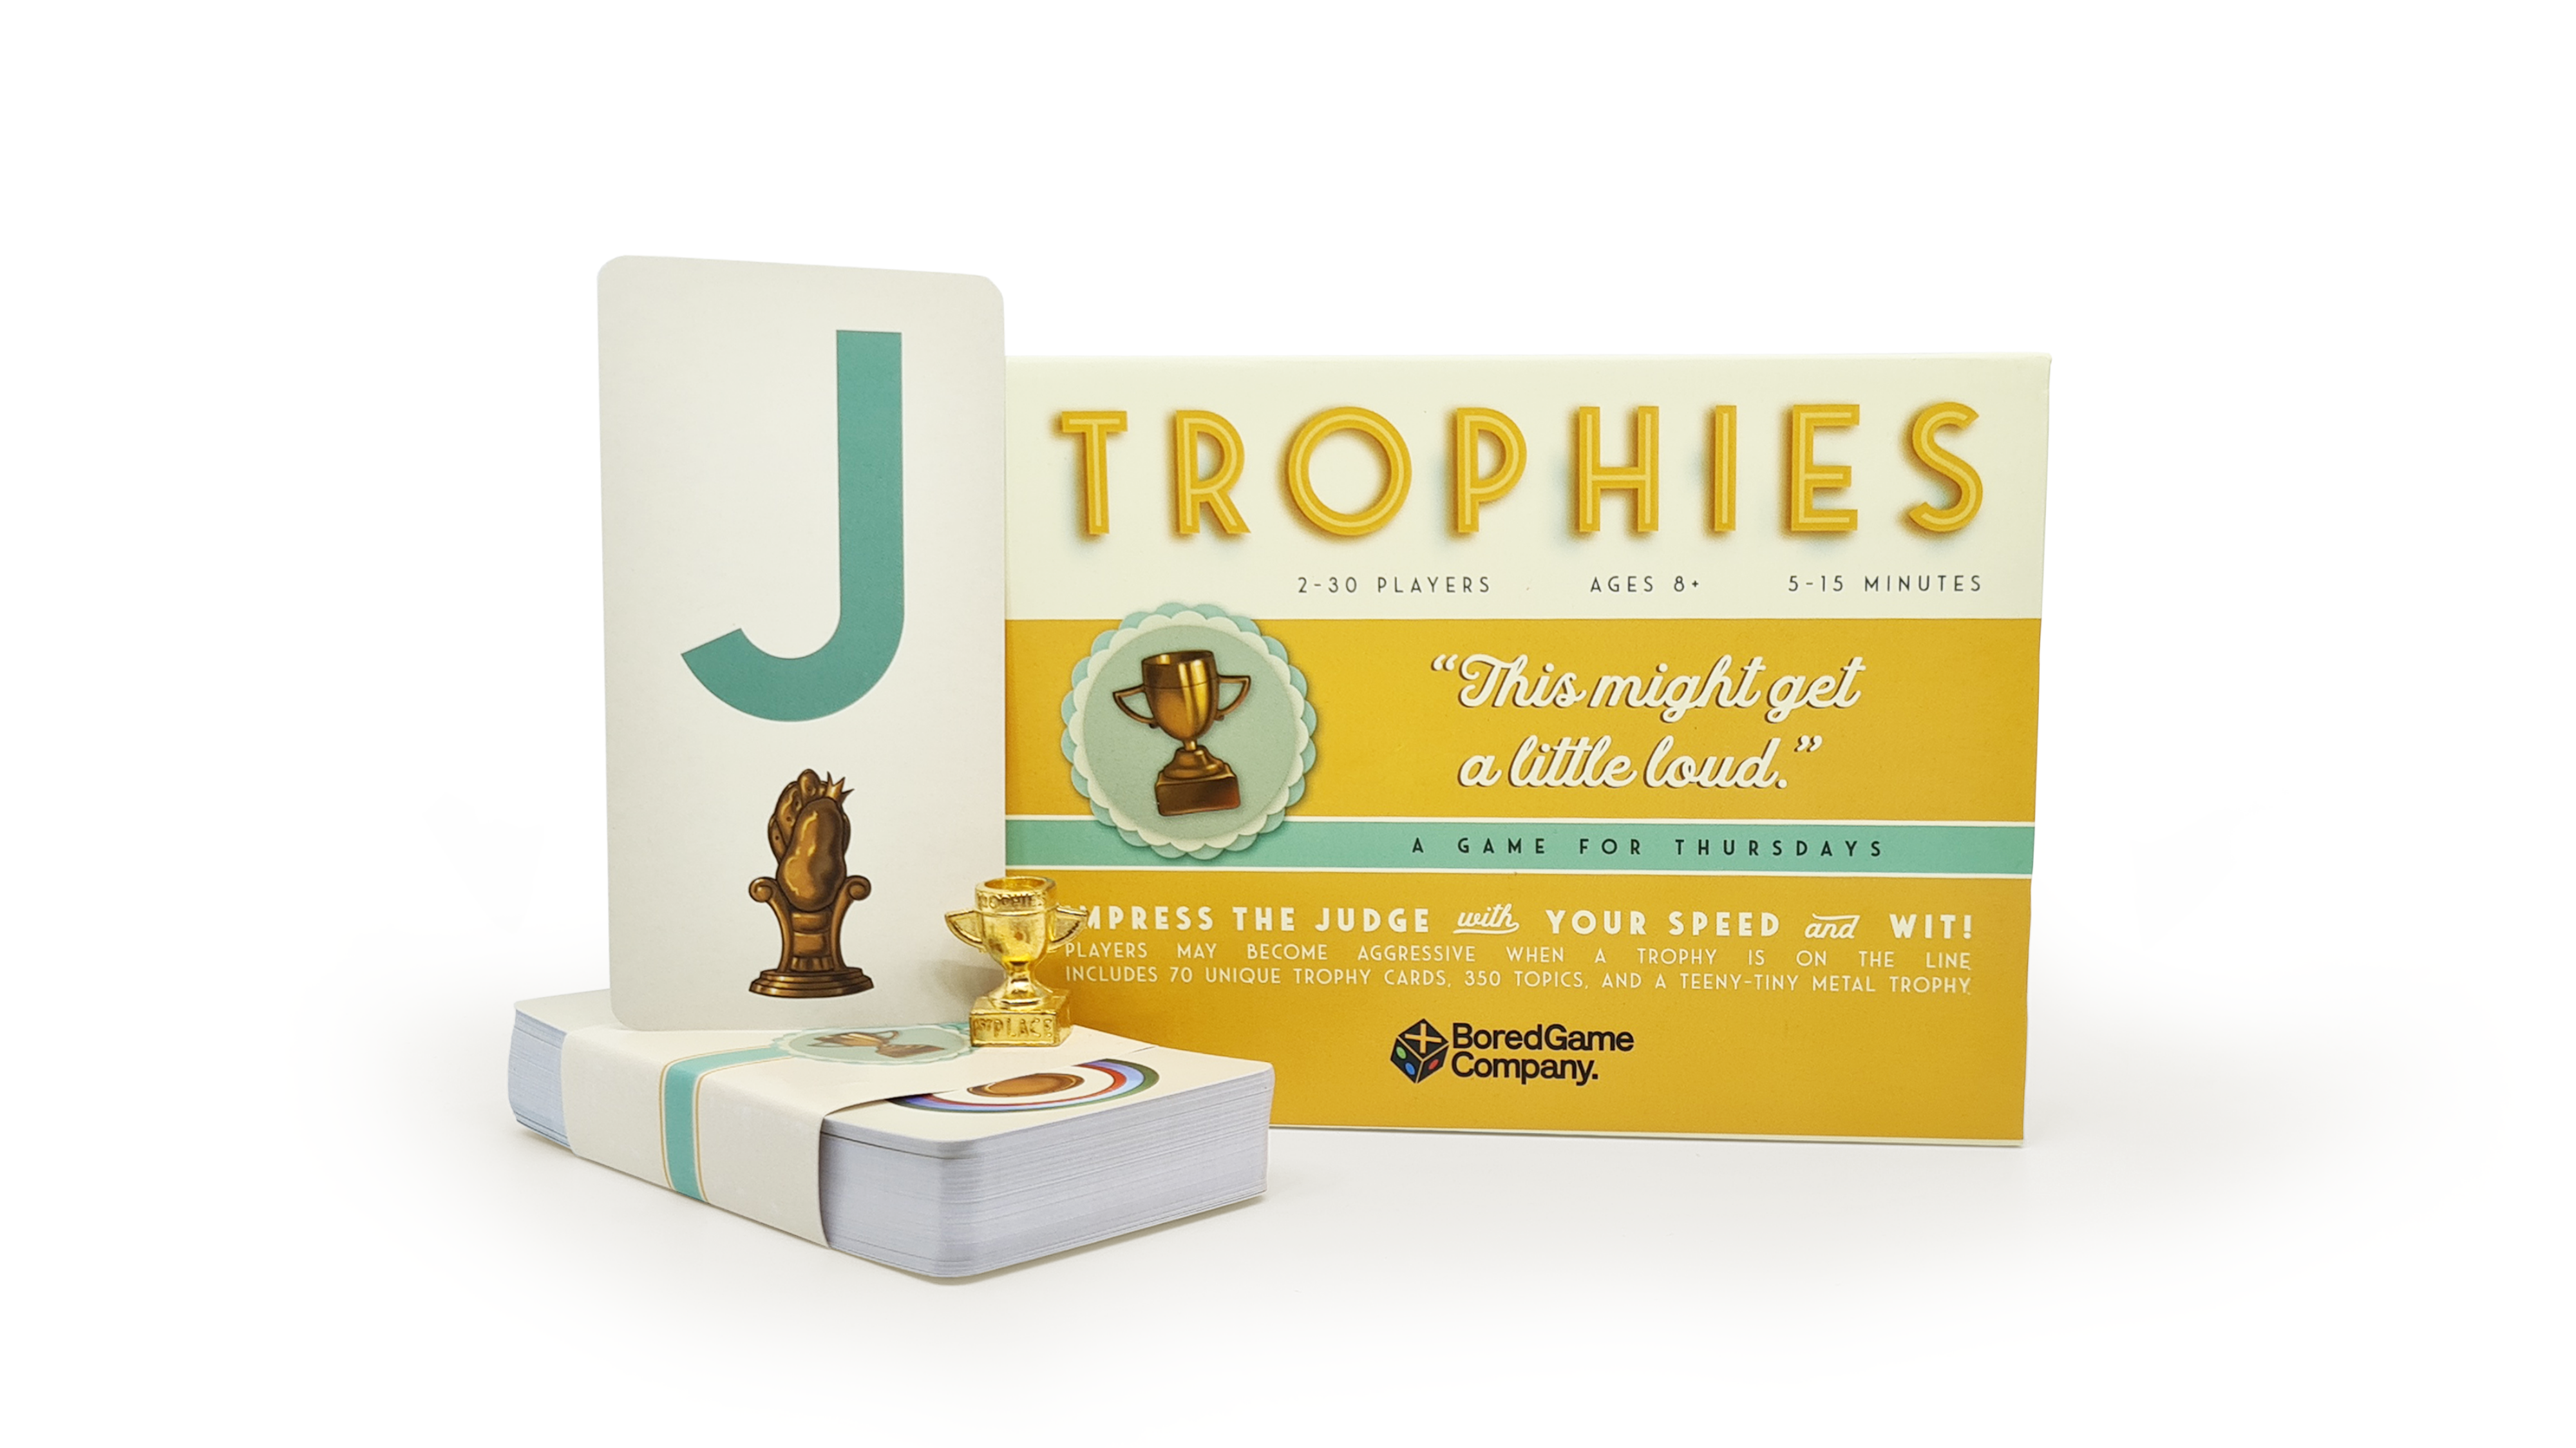 trophies
bored game company
christmas